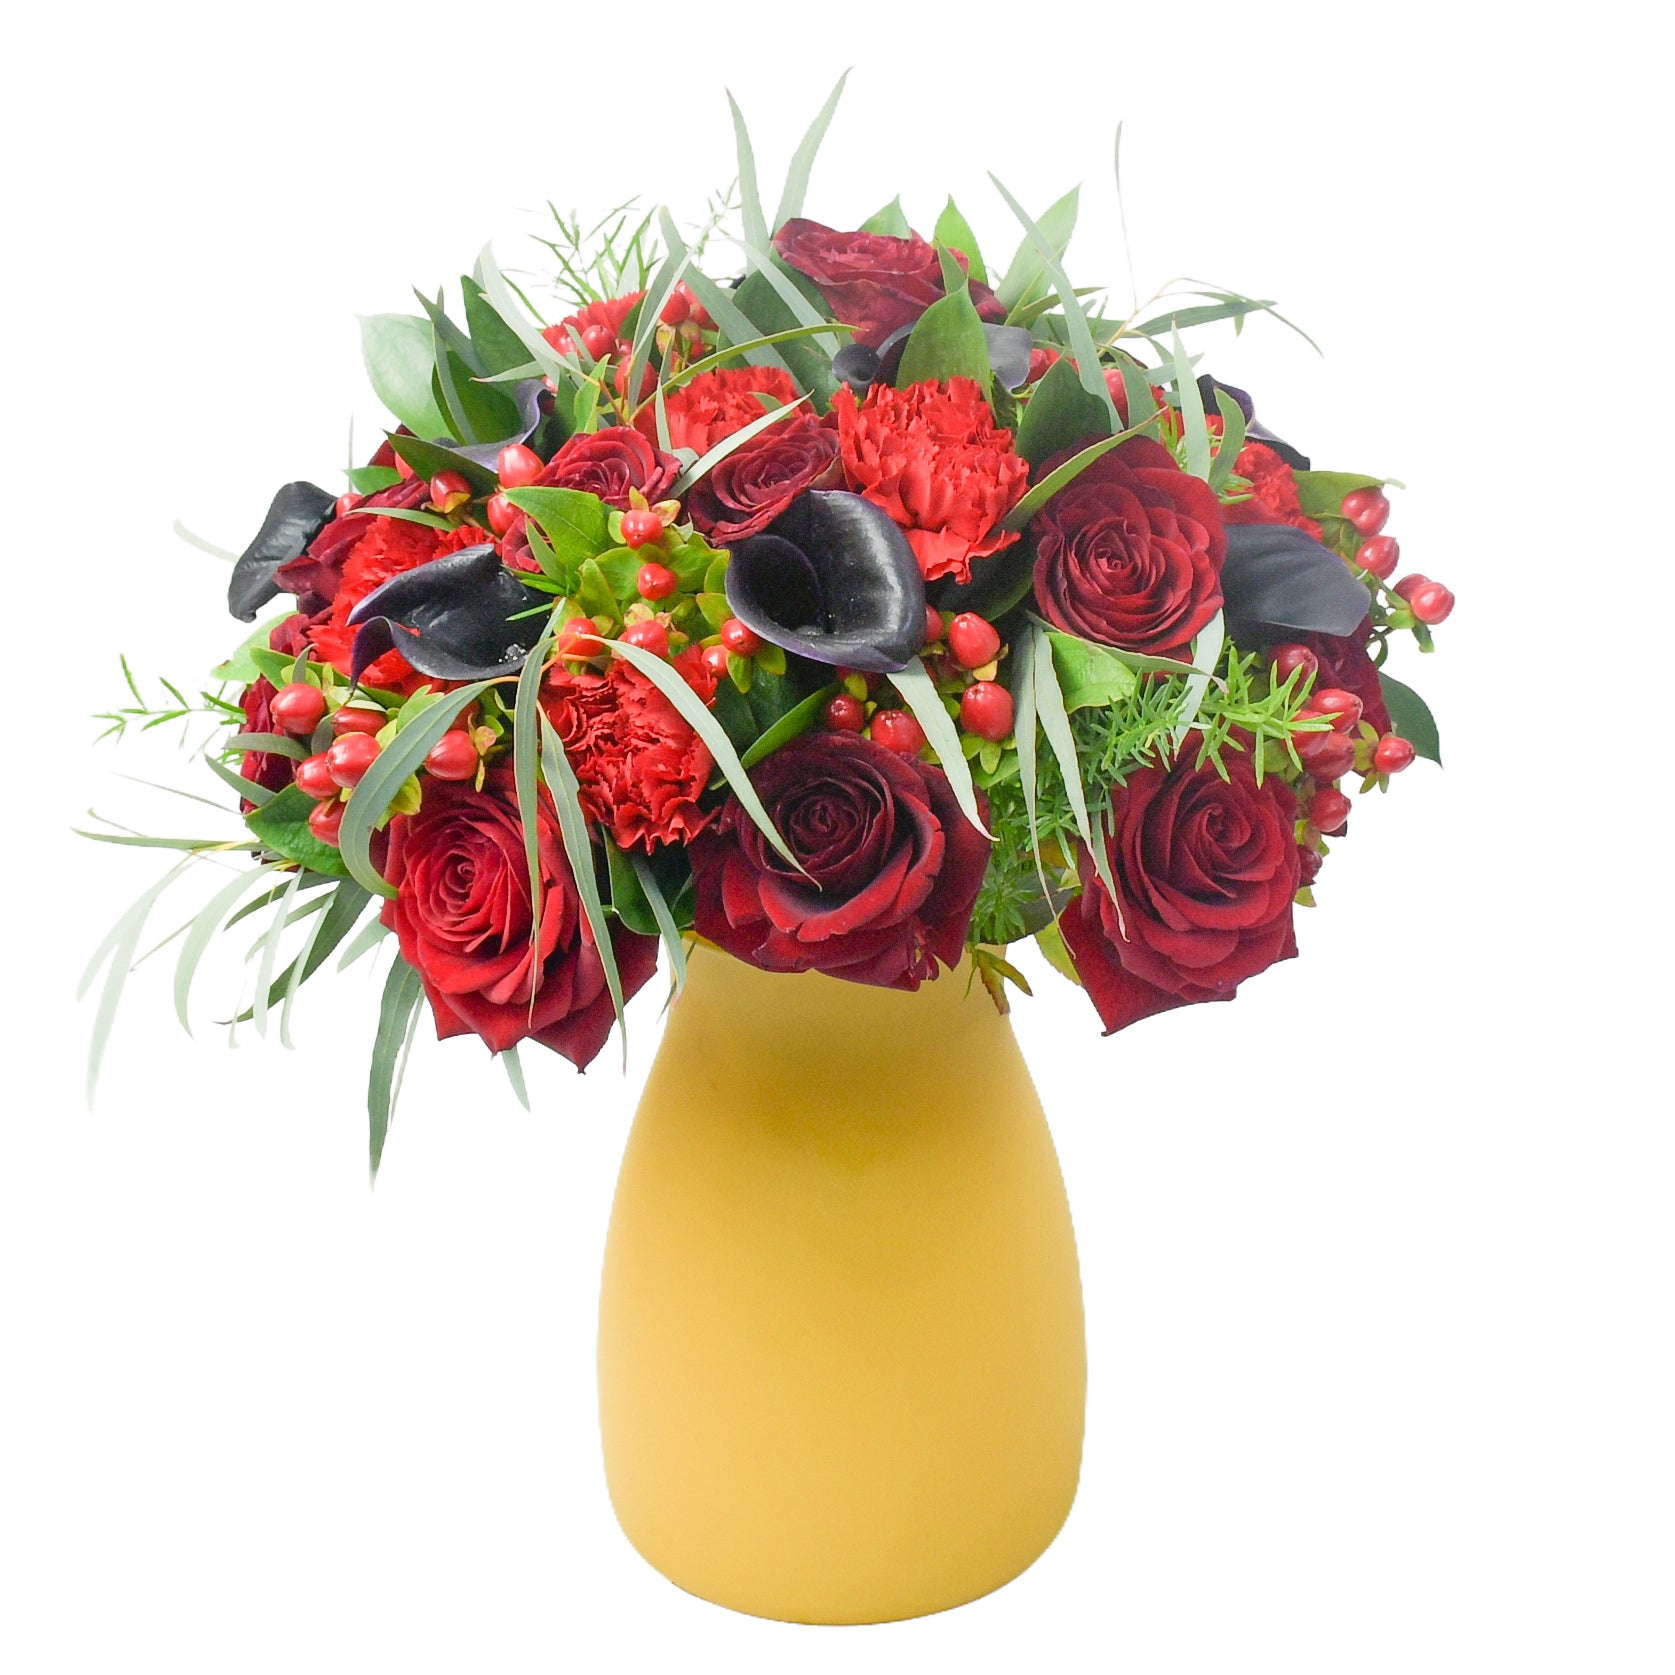 calla lilies and roses bouquet in a vase